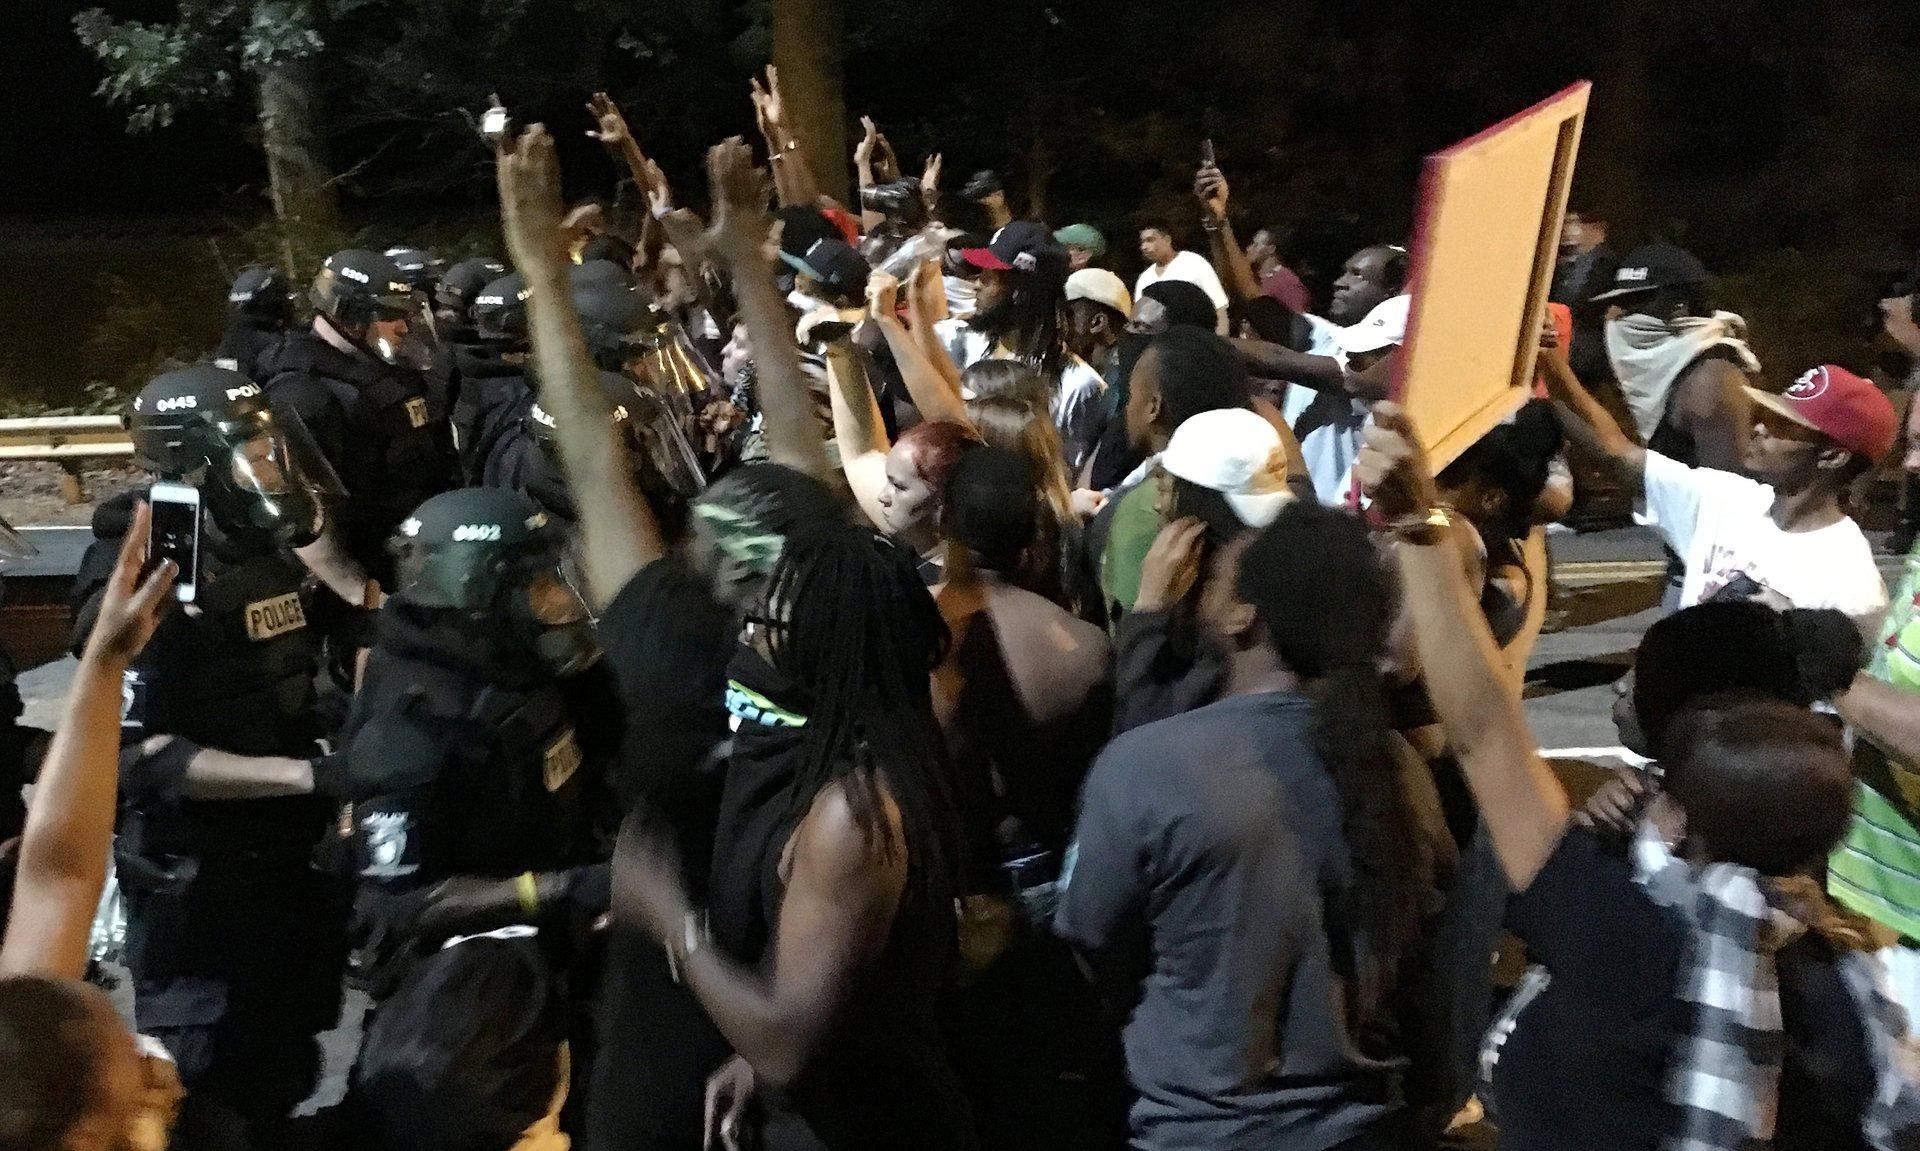 Protesters clashed with police after the fatal police shooting of Keith Scott in Charlotte, North Carolina.